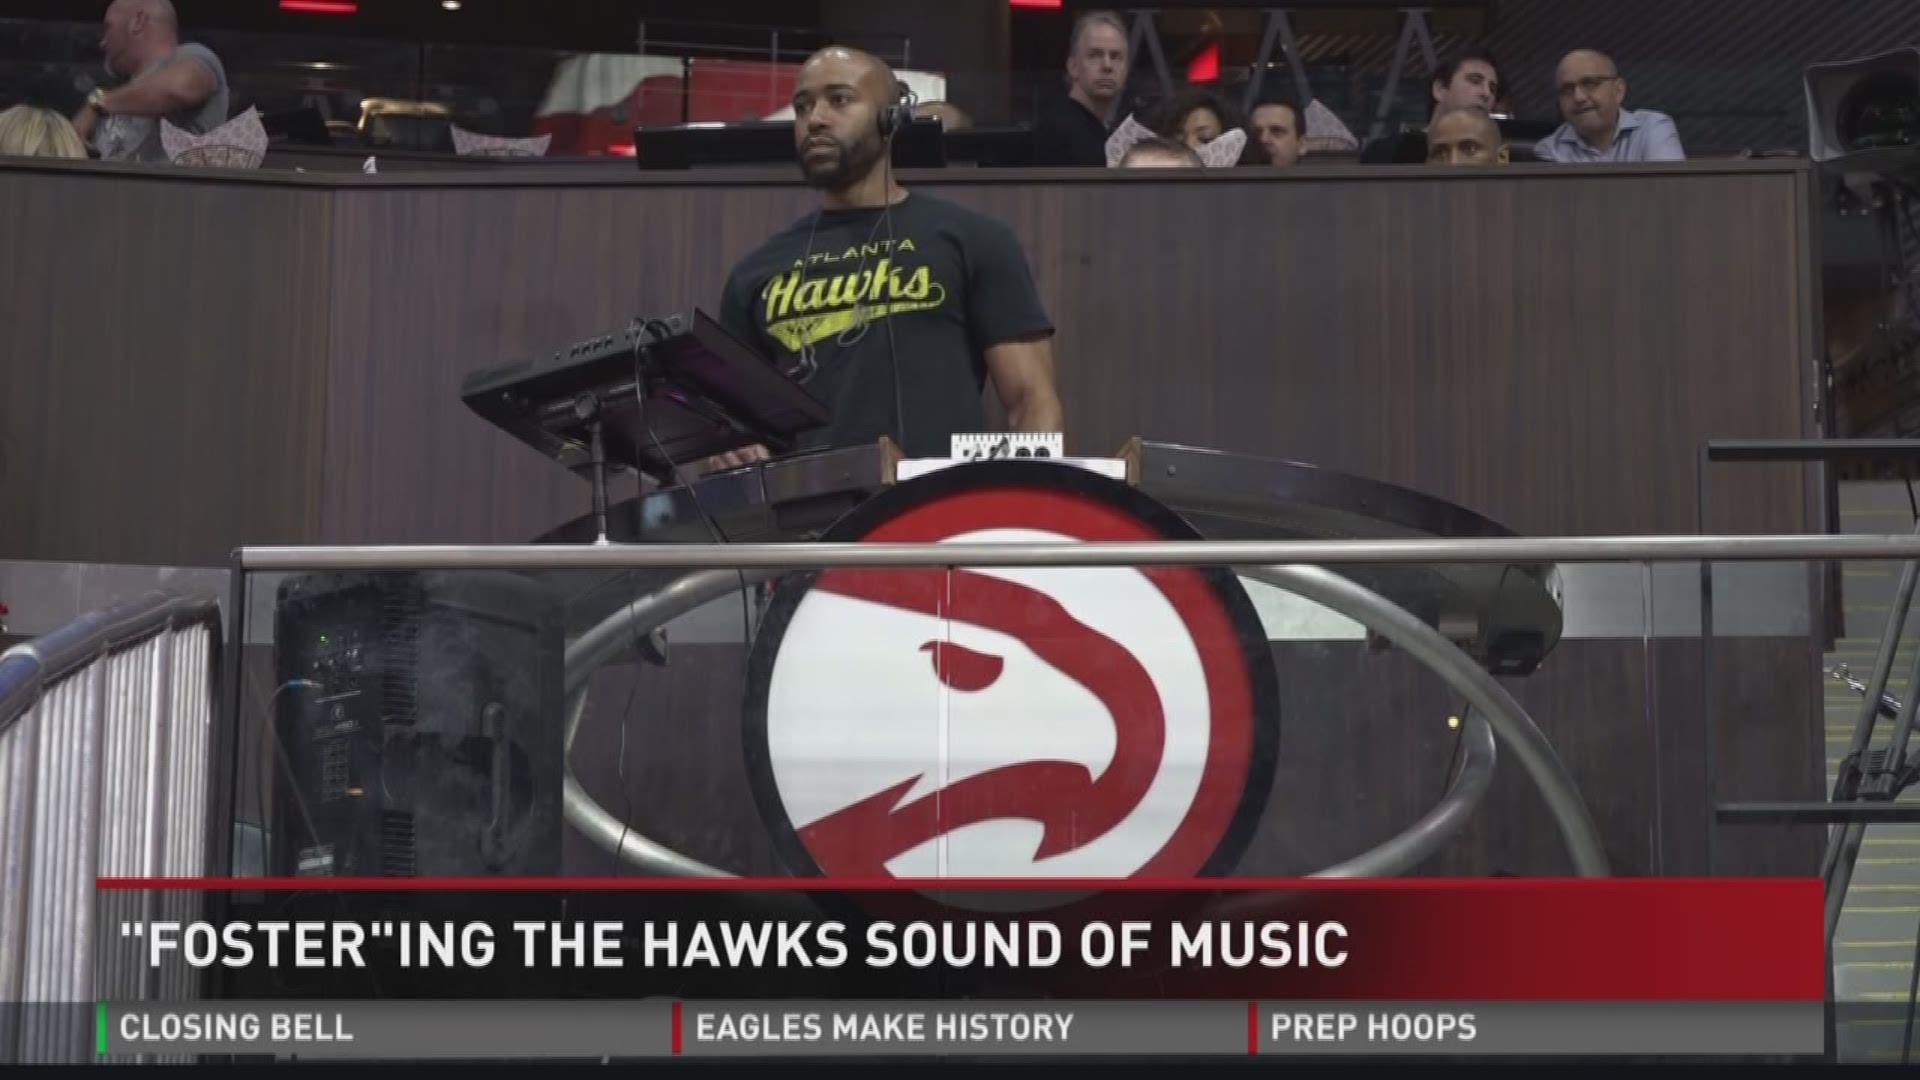 Organist 'Foster'-ing the Hawks' sound of music